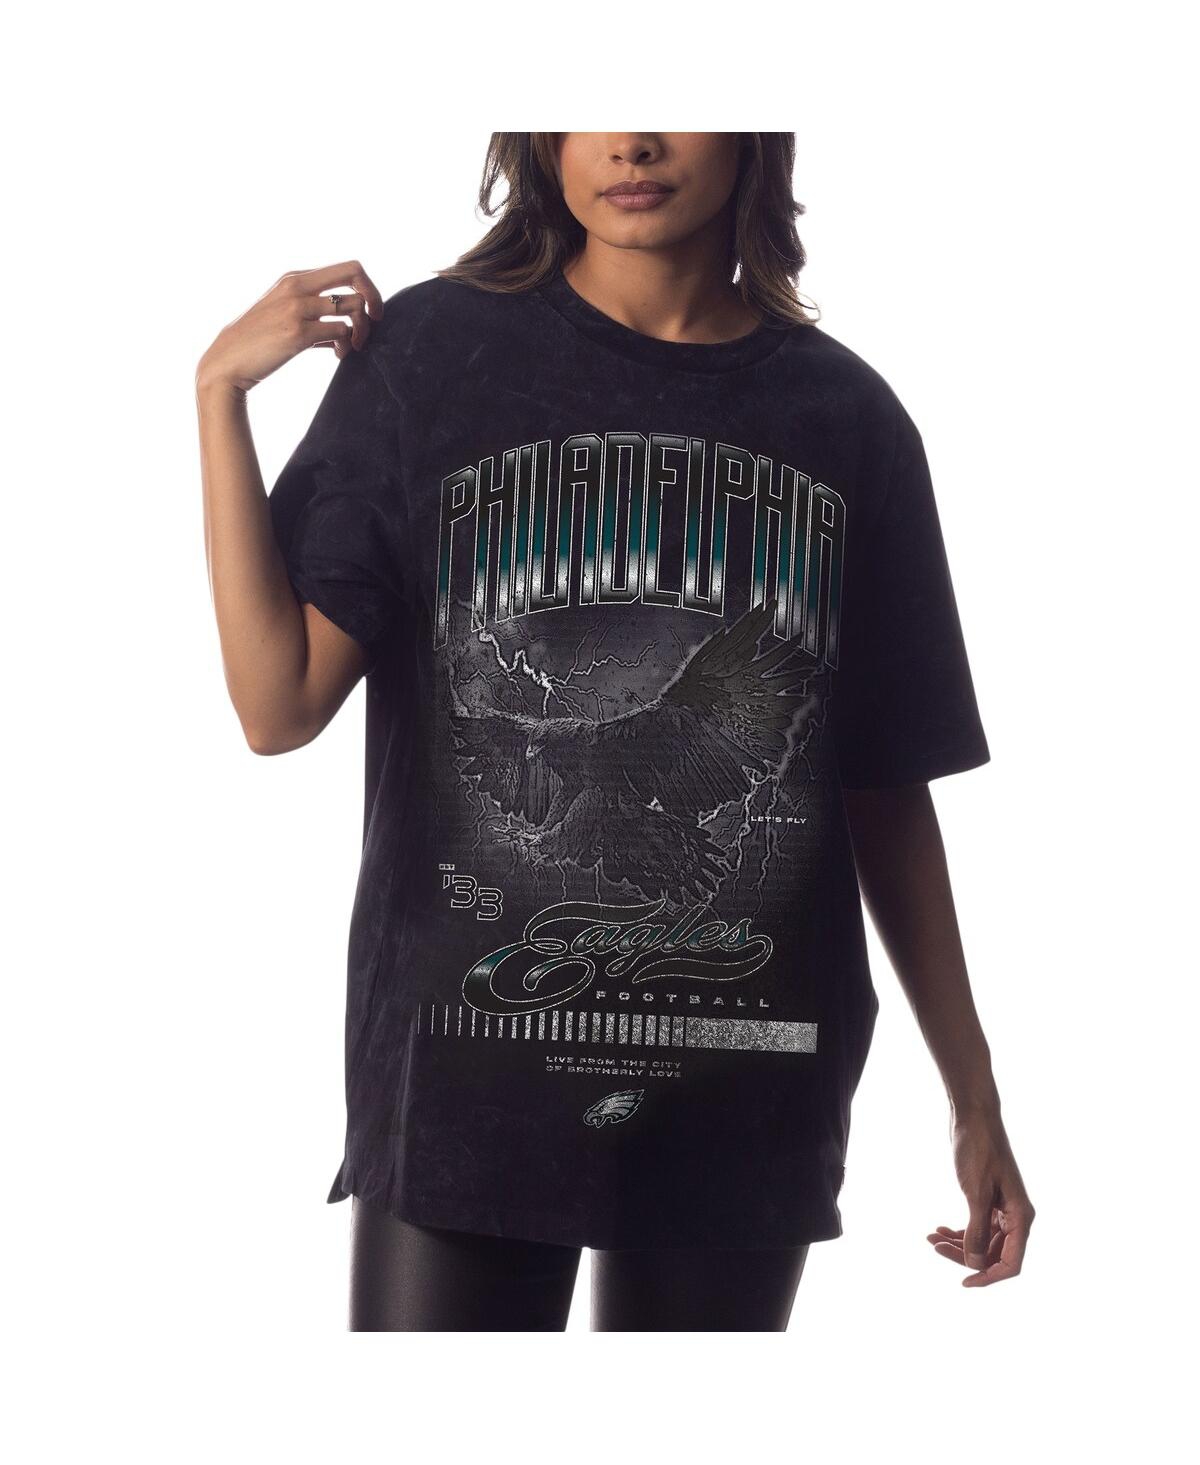 Shop The Wild Collective Men's And Women's  Black Distressed Philadelphia Eagles Tour Band T-shirt